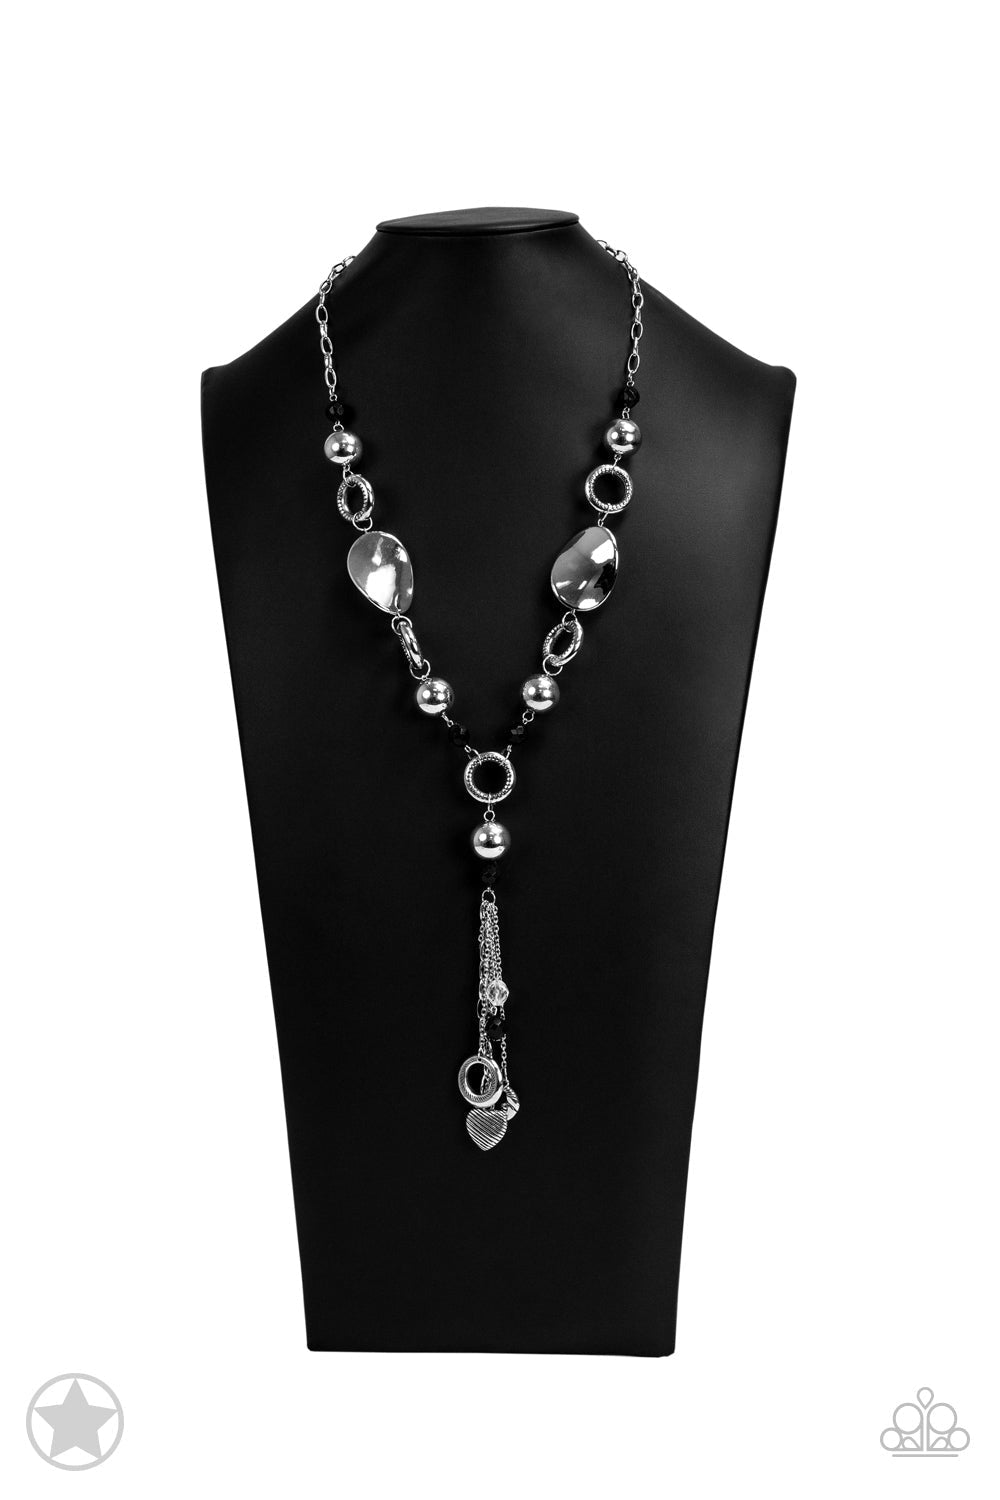 Total Eclipse Of the Heart - Silver and Black Fashion Necklace - Paparazzi Accessories - Long chain of black crystalized beads, curved plates of silver with a pearly finish, and chunky silver rings lead down to a tassel of chains and charms, including a crescent moon and a heart. 